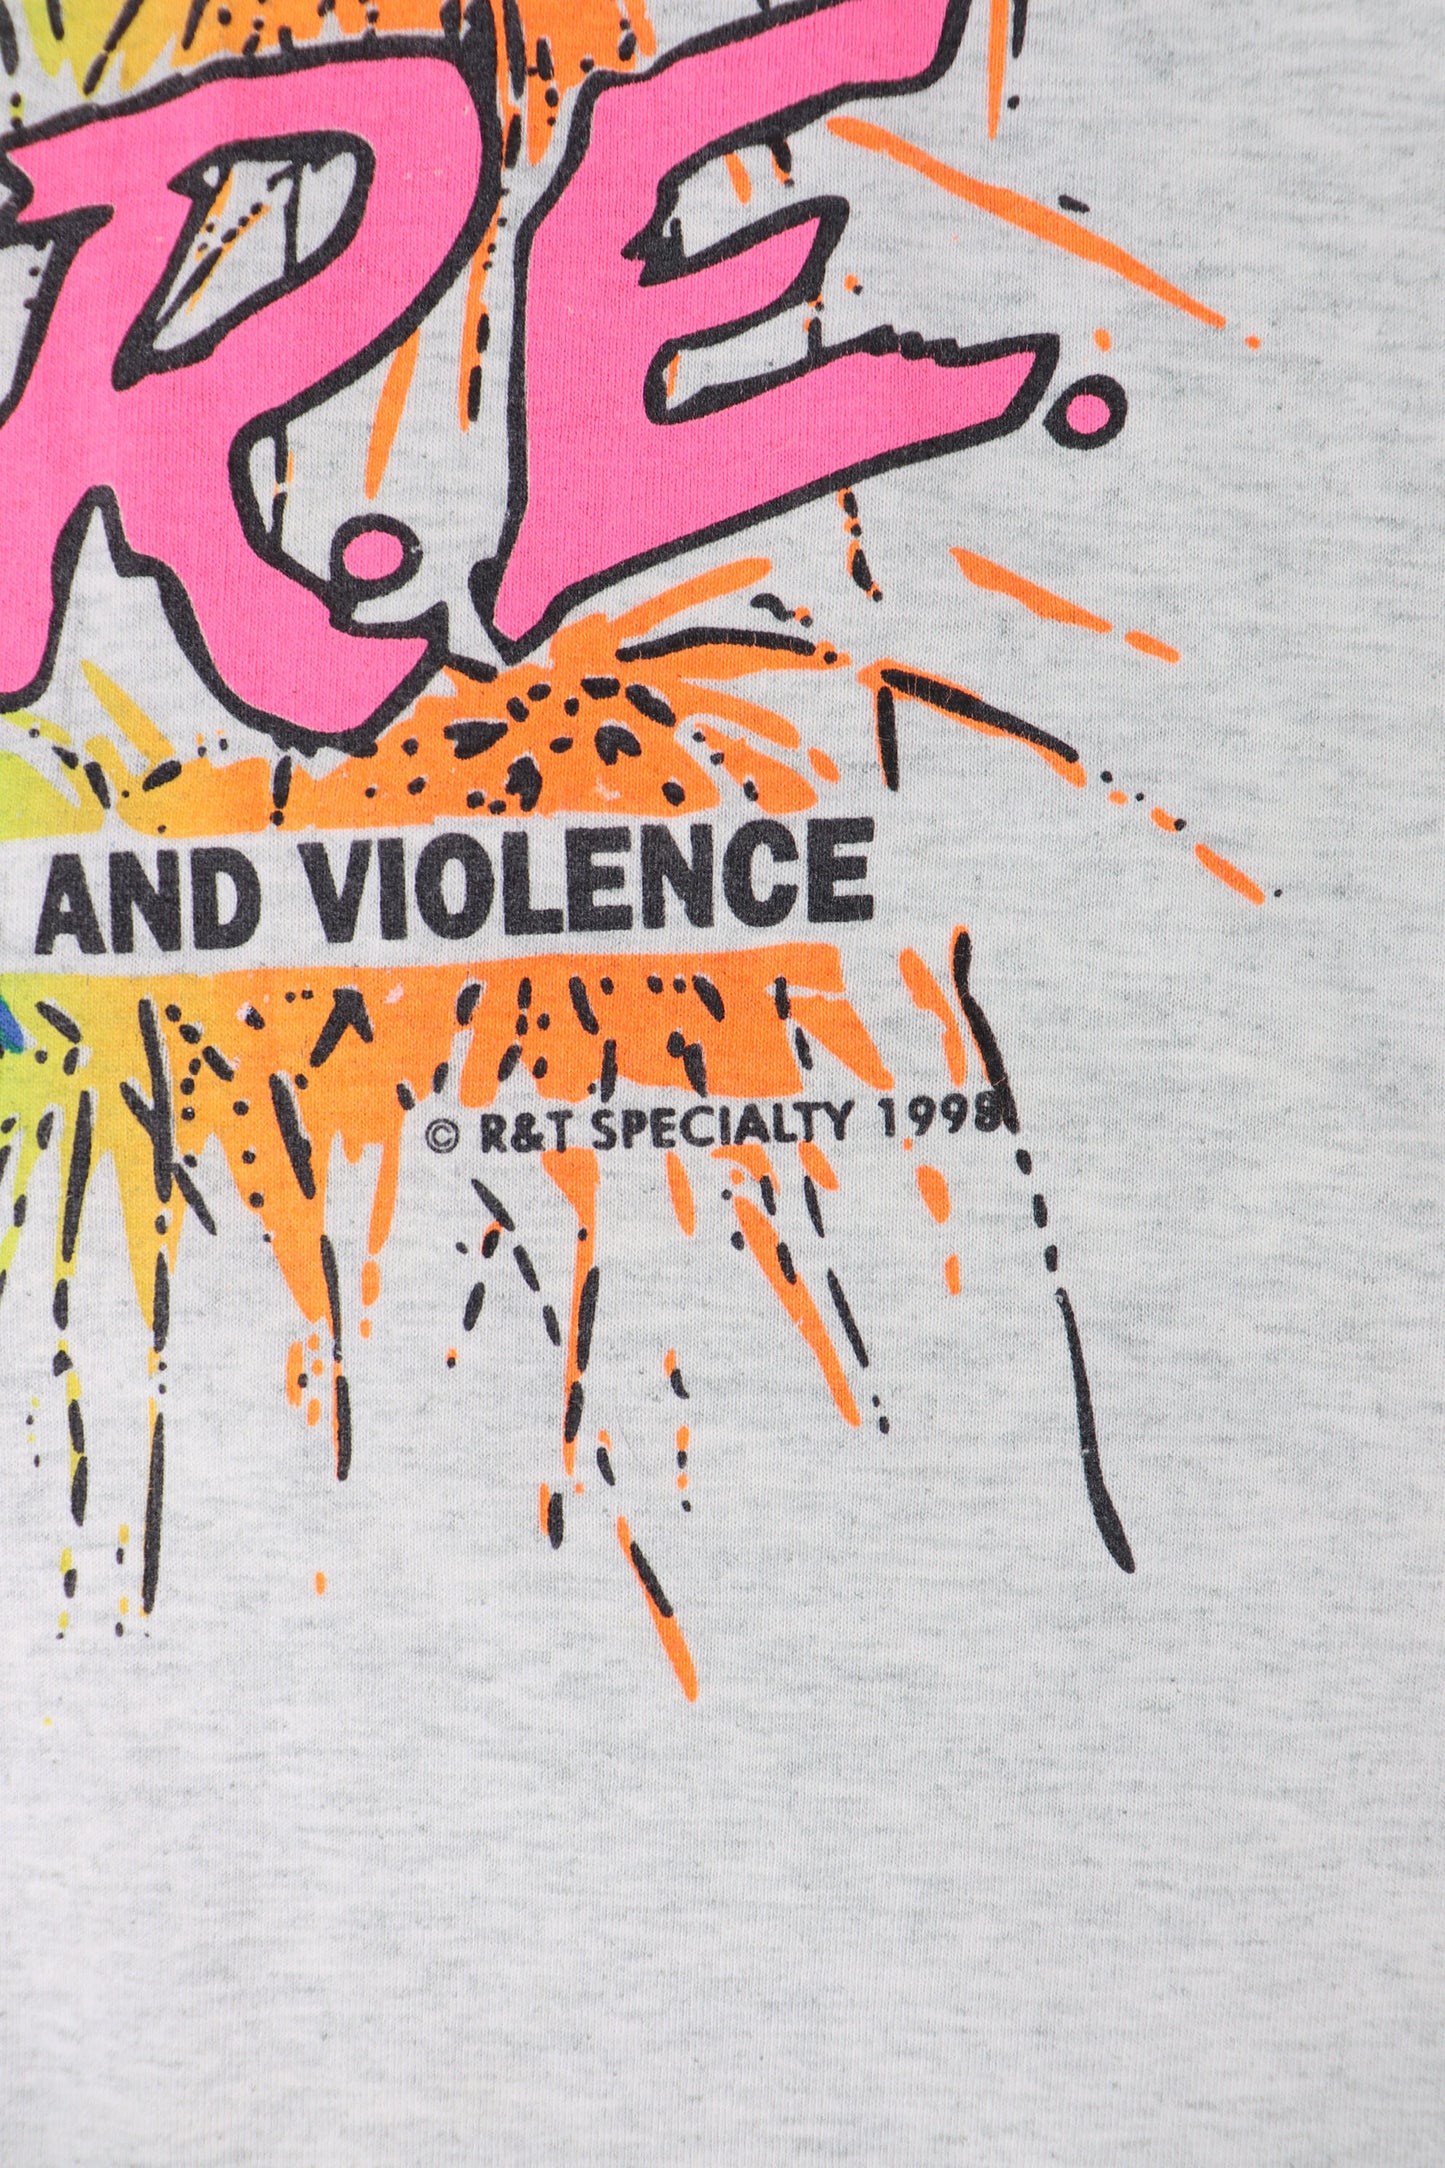 D.A.R.E TO RESIST DRUGS AND VIOLENCE 1998